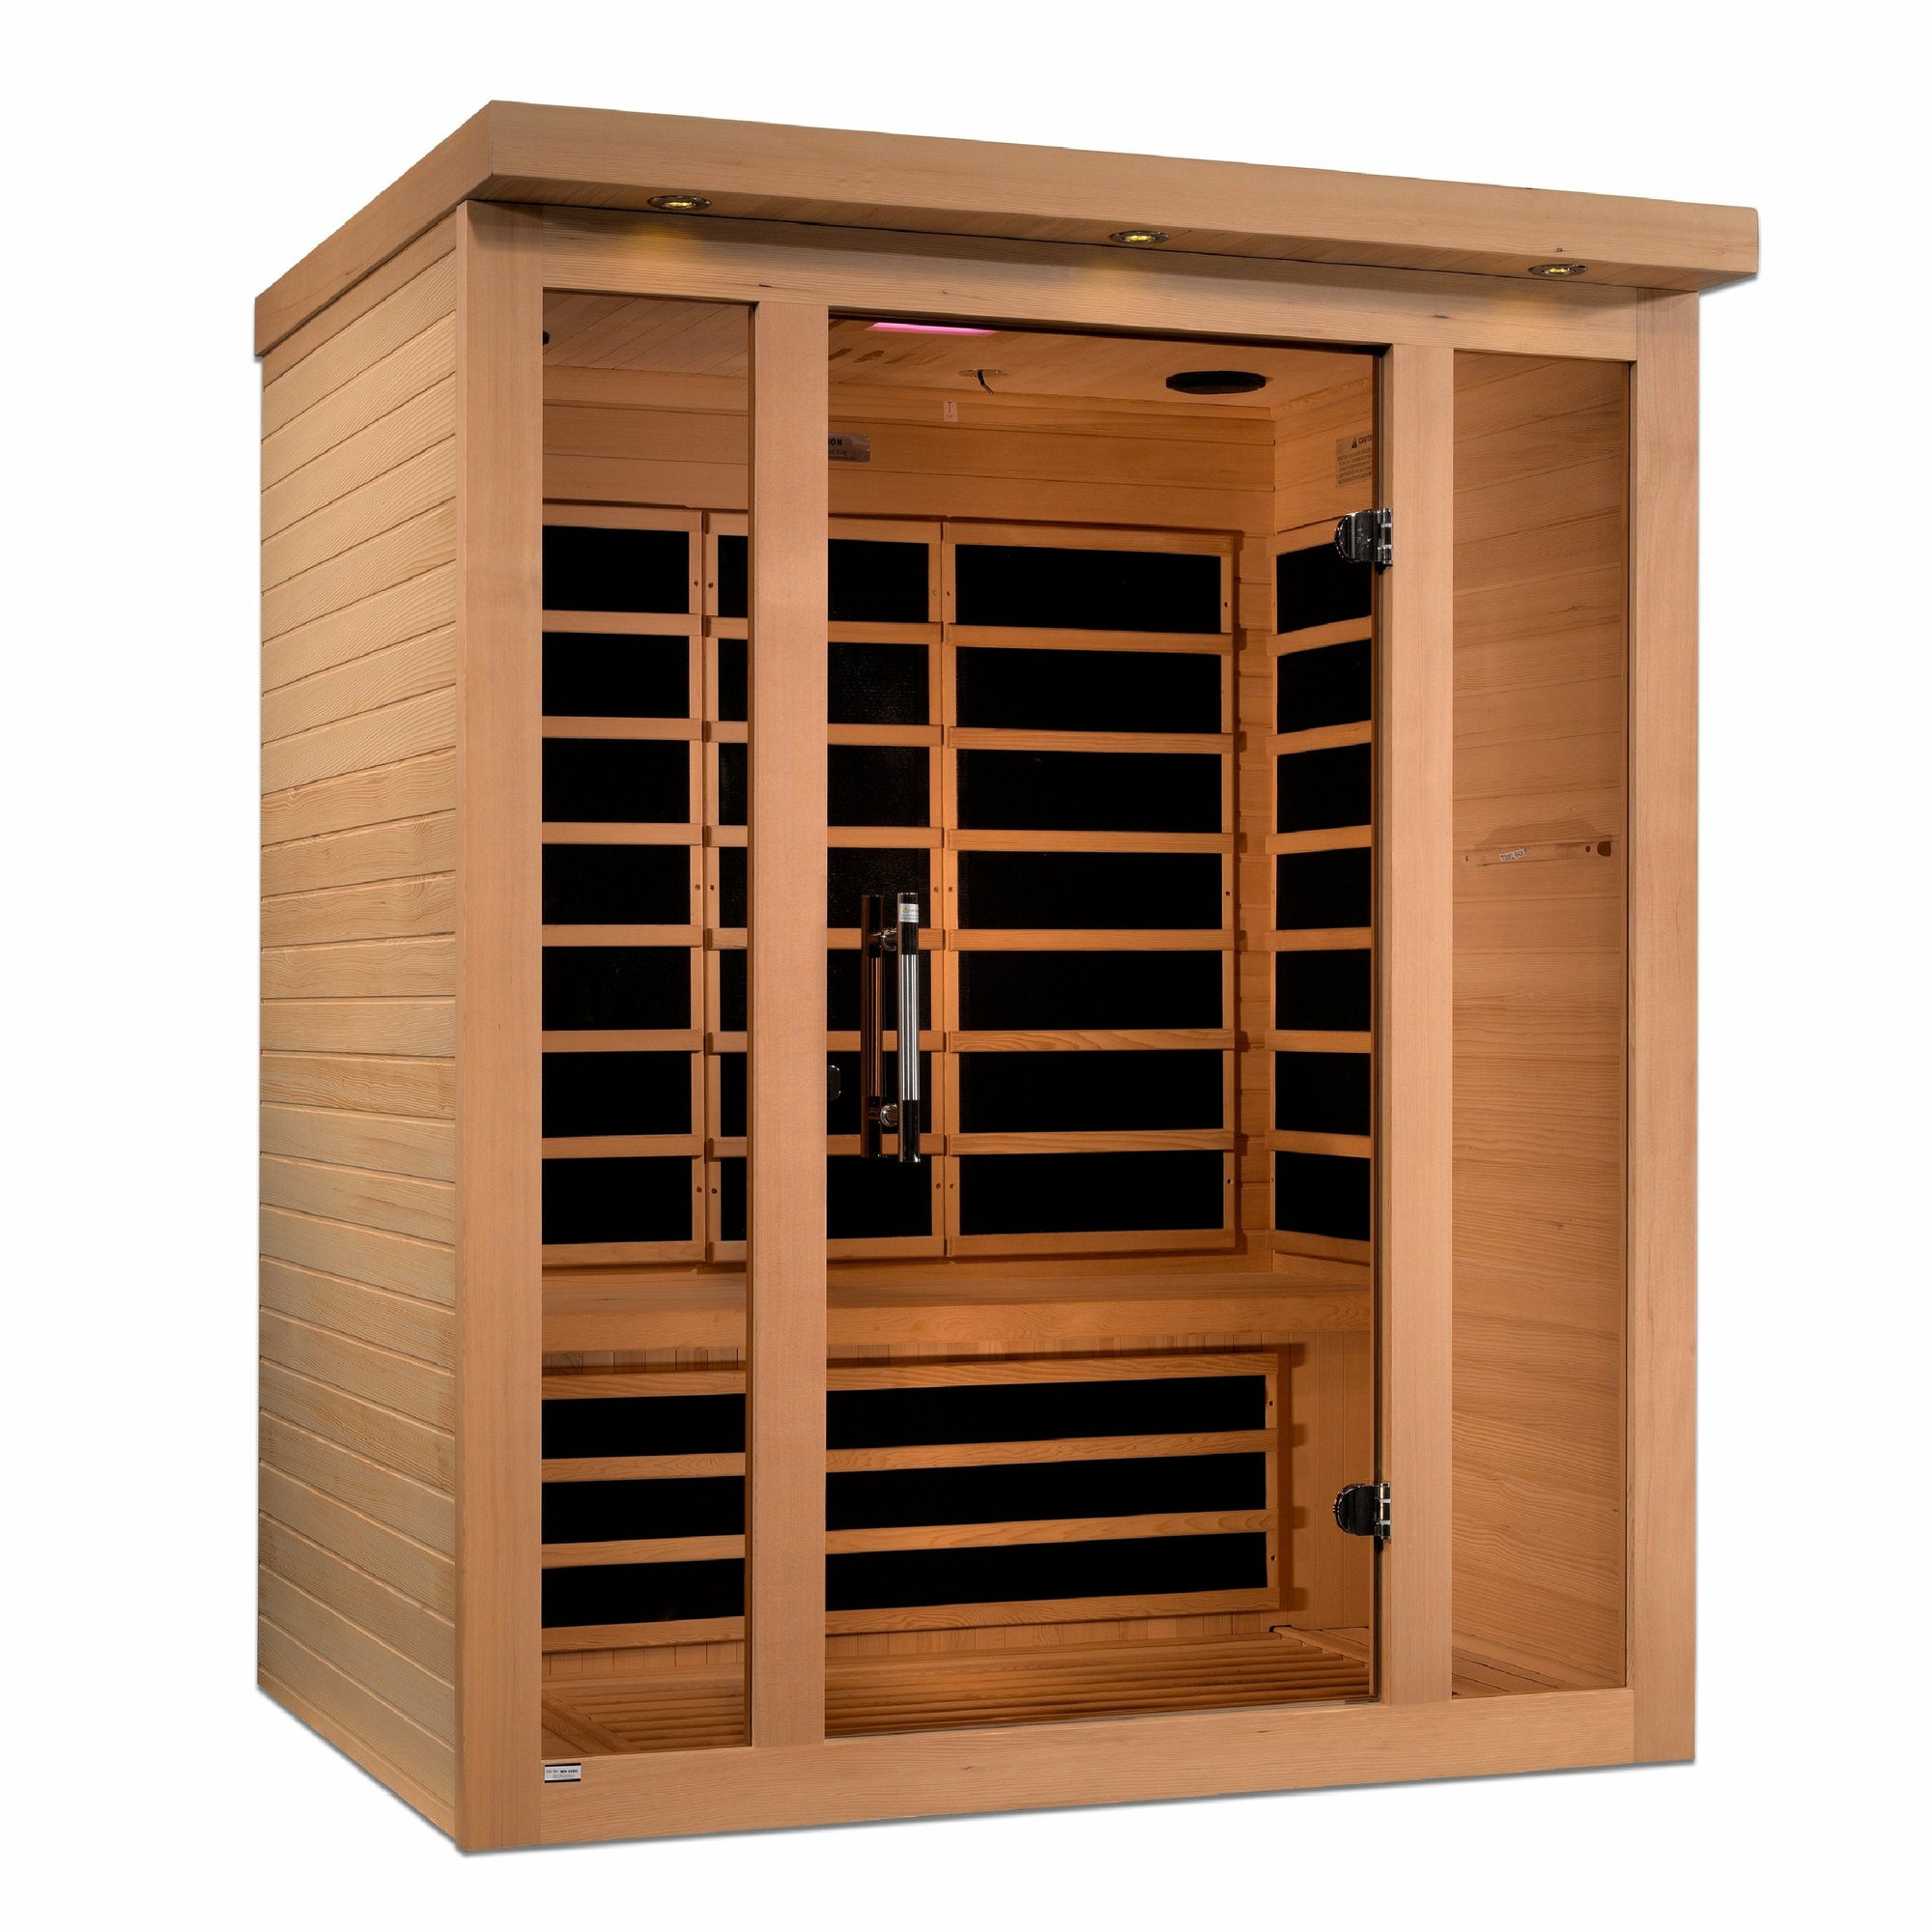 Vila Ultra Low EMF FAR Infrared Sauna - Natural hemlock wood construction with Tempered glass door in a white background isometric view